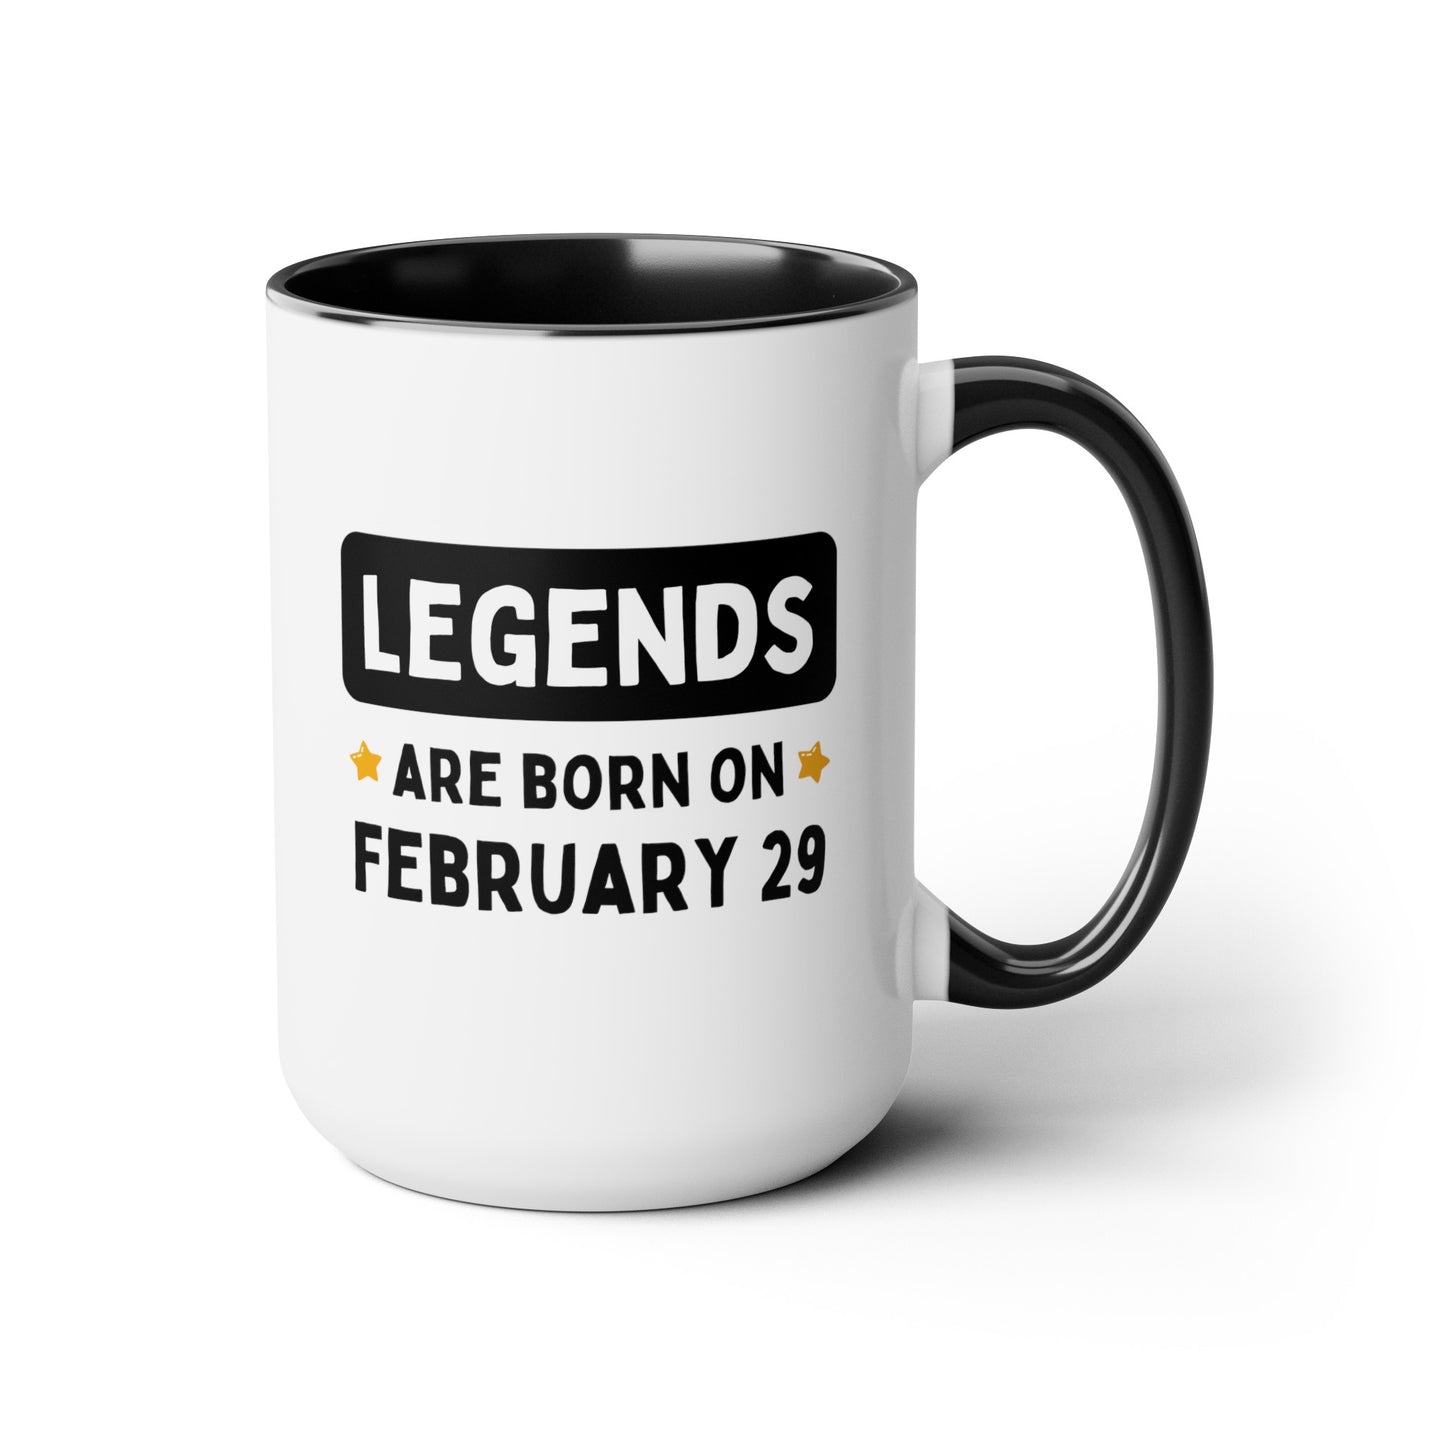 Legends are Born on February 29 15oz white with black accent funny large coffee mug gift for leap year custom birthday date him her best friend personalized waveywares wavey wares wavywares wavy wares